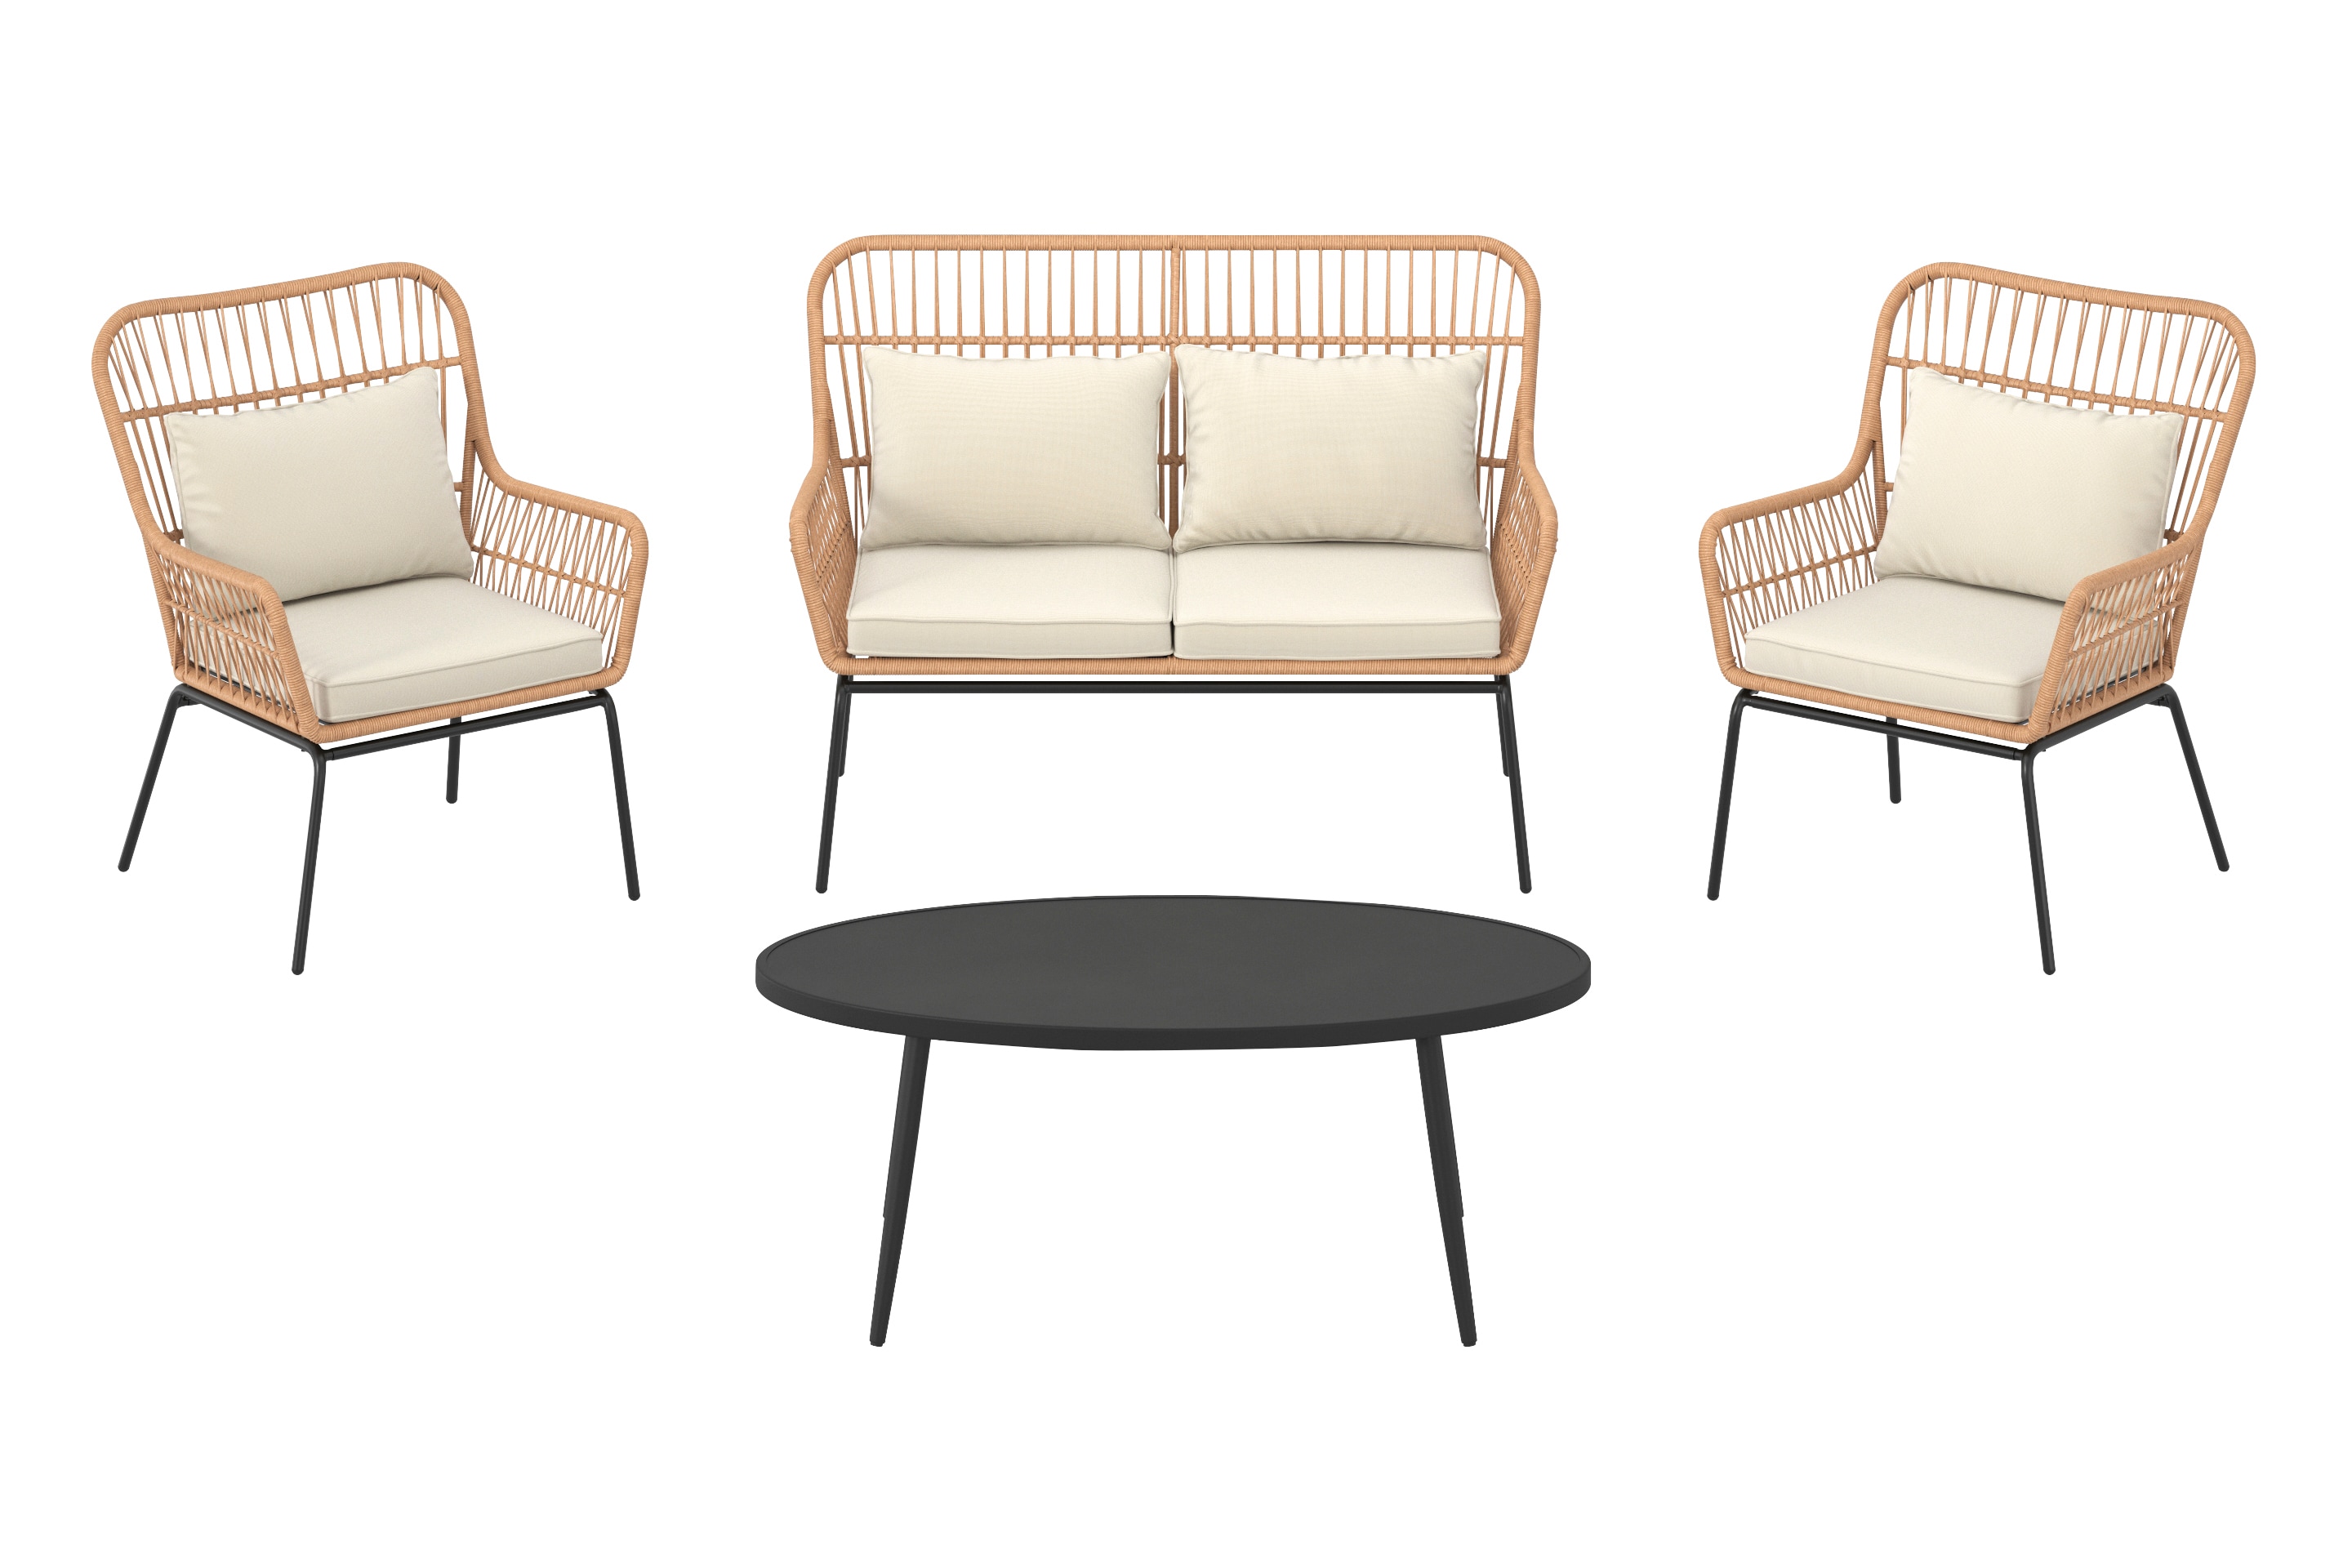 Wicker Patio the Off-white 21 Conversation Patio Conversation Sets Brynlee department in Origin Cushions at 4-Piece Set with